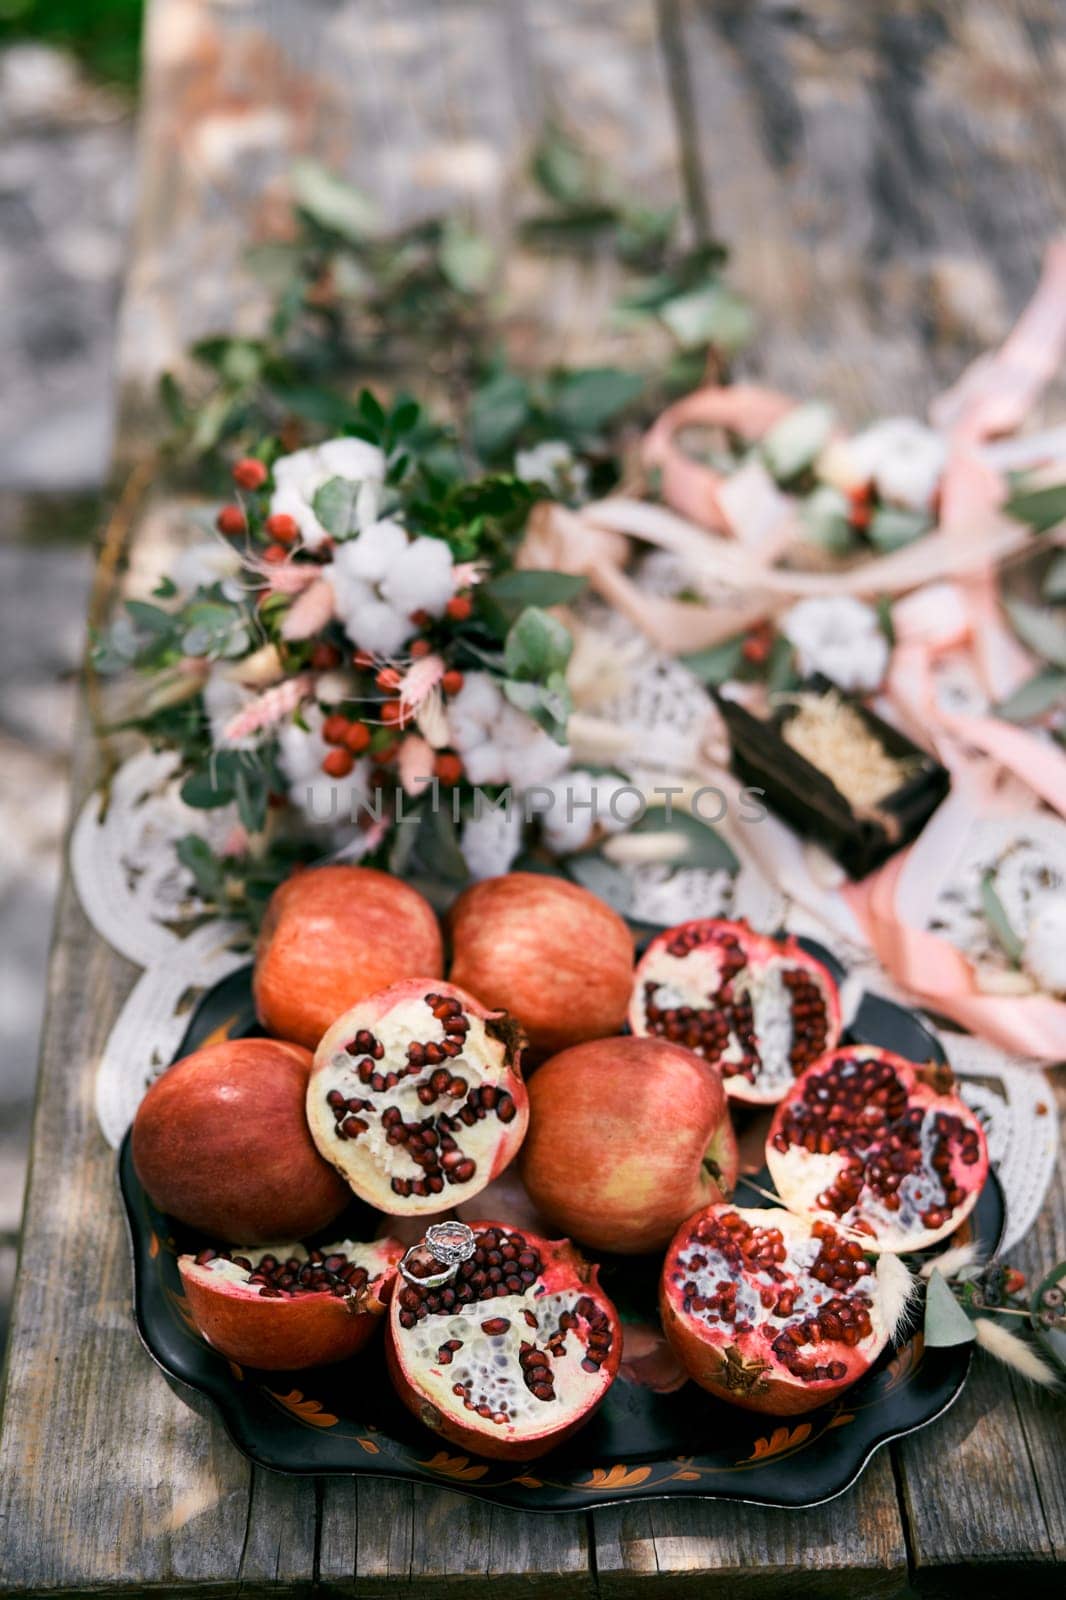 Wedding rings lie on half a pomegranate on a plate of fruit on the table next to the wedding bouquet. High quality photo